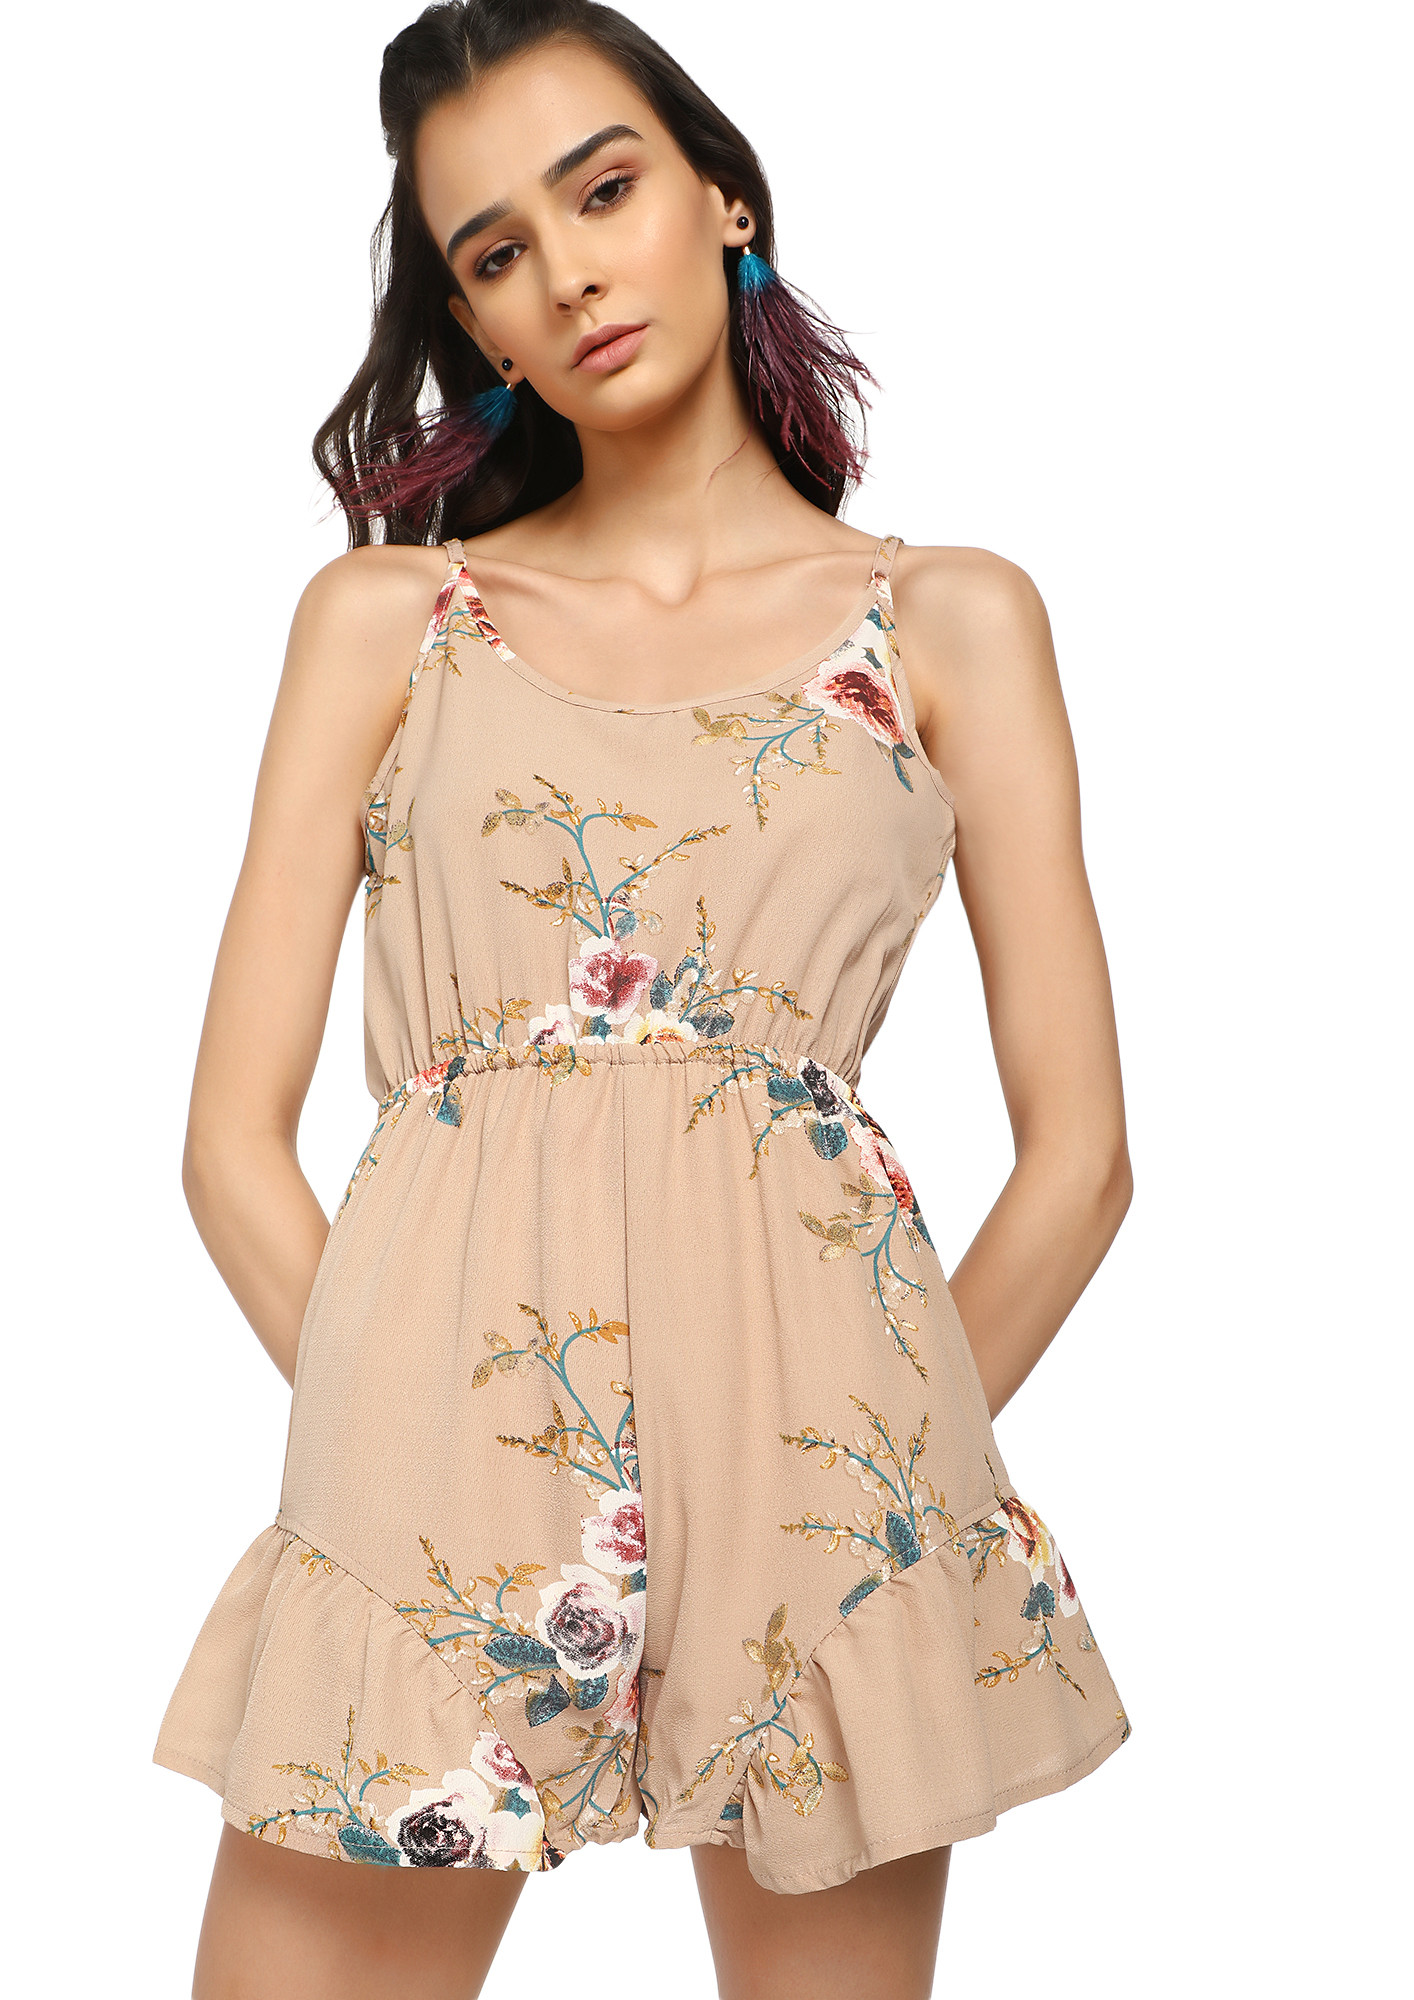 Don't Be Shy Nude Pink Floral Romper